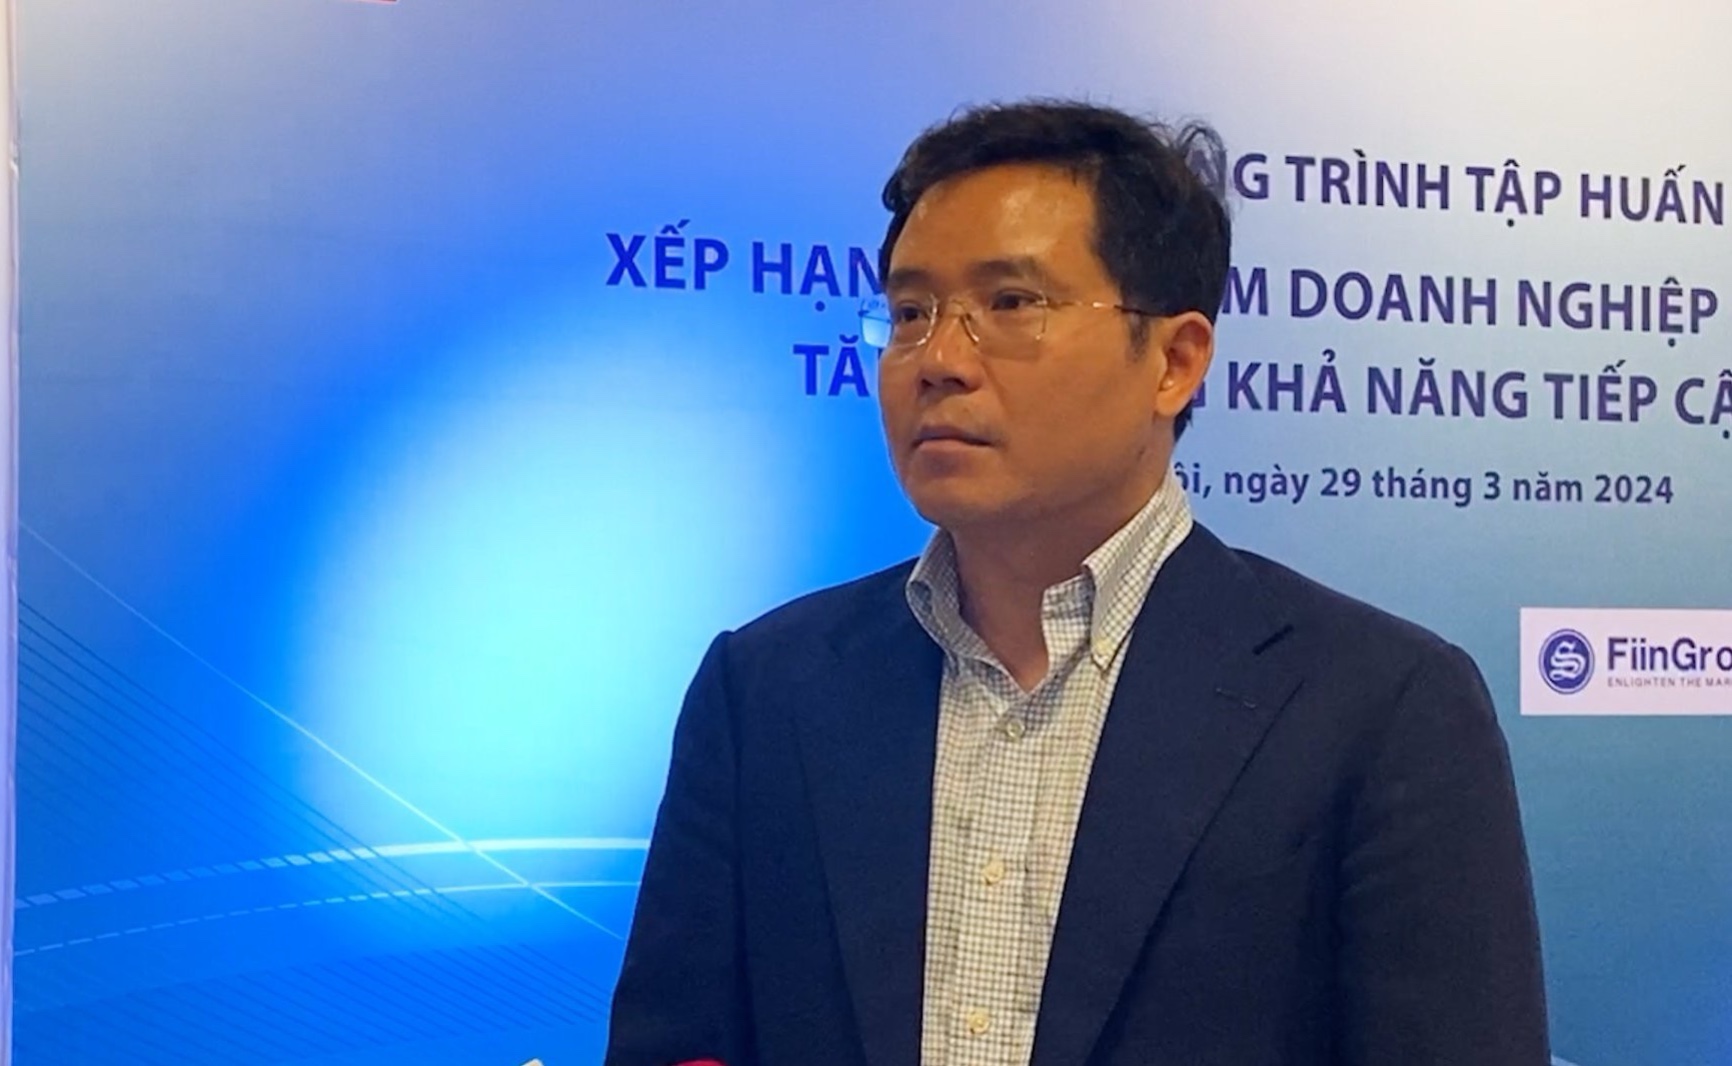 Mr Nguyen Quang Thuan, Chairman of the Board of Directors of FiinGroup